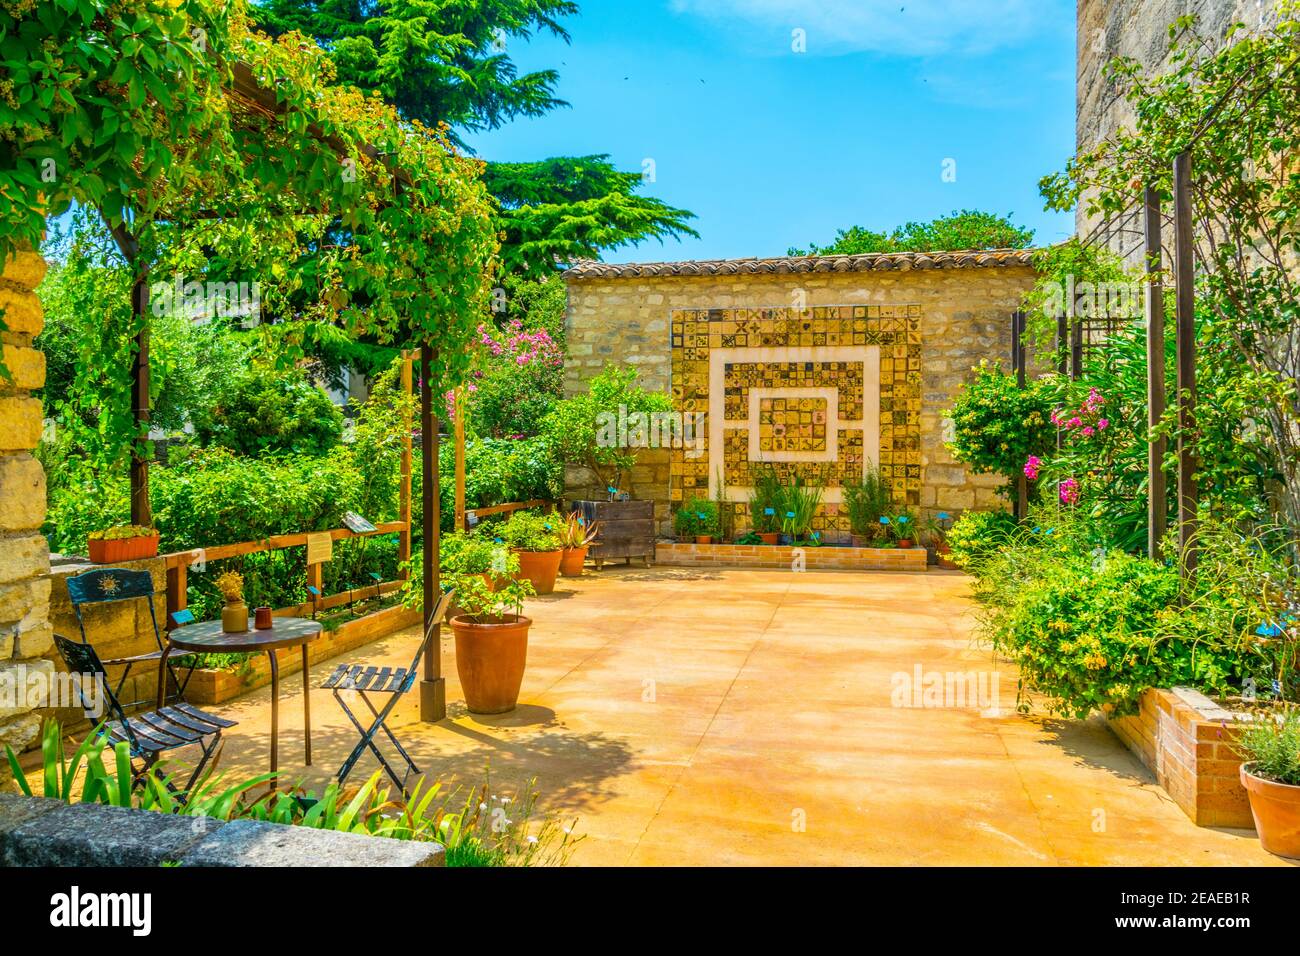 Medieval garden in the french city Uzes Stock Photo - Alamy